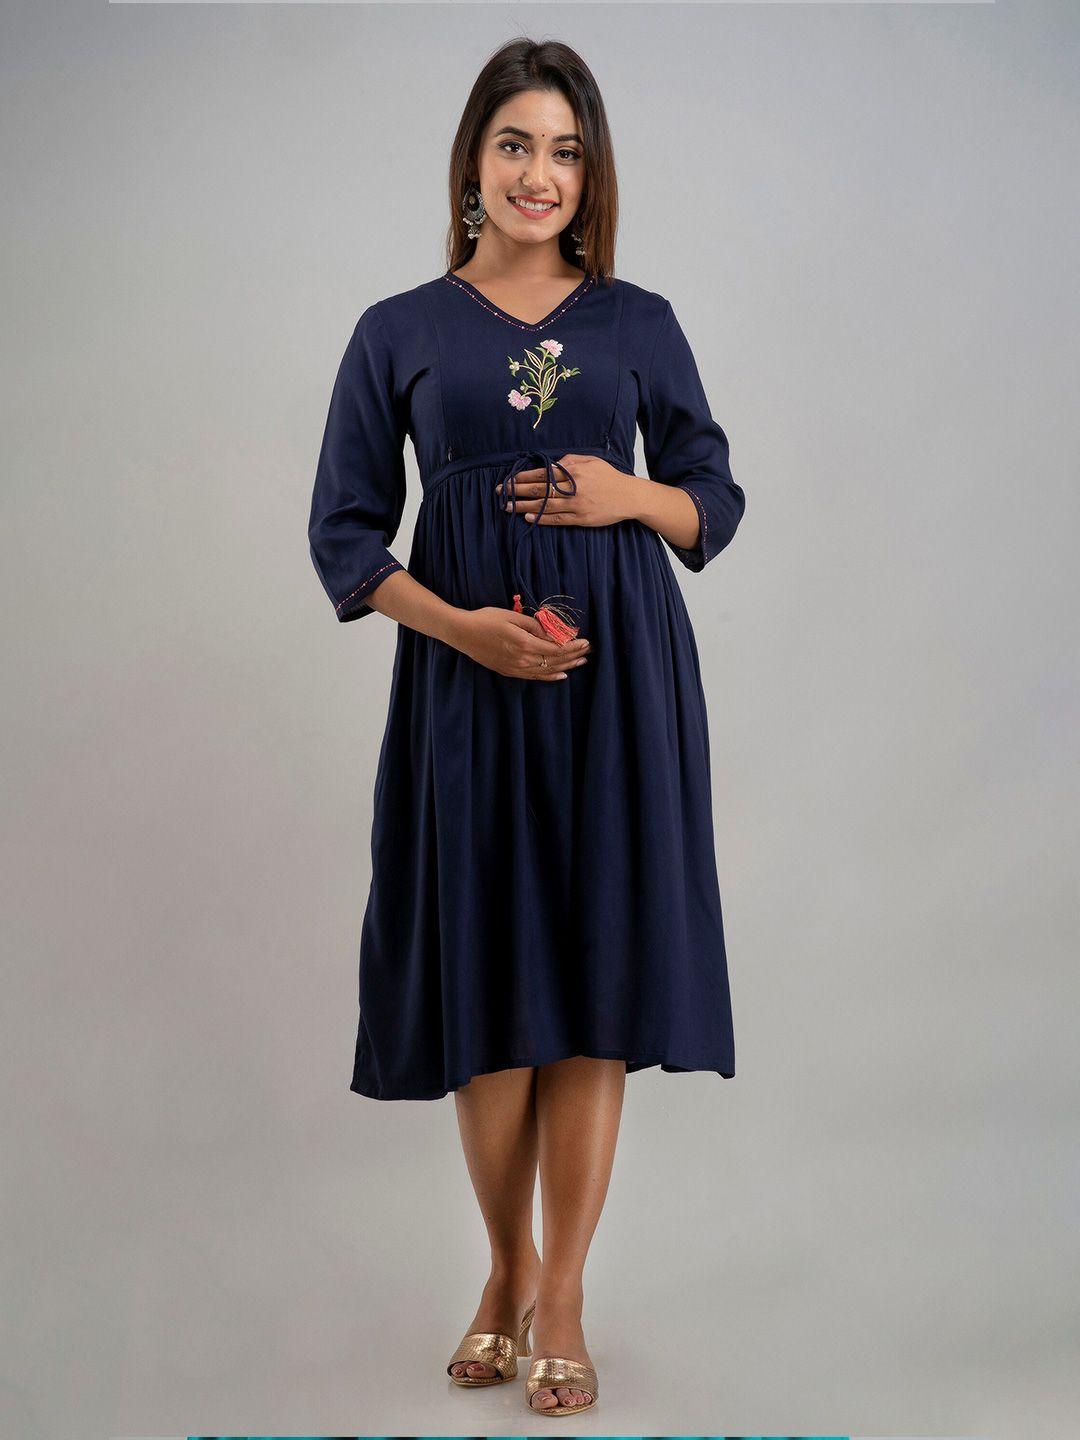 misbis-navy-blue-floral-embroidered-side-zip-maternity-empire-midi-dress